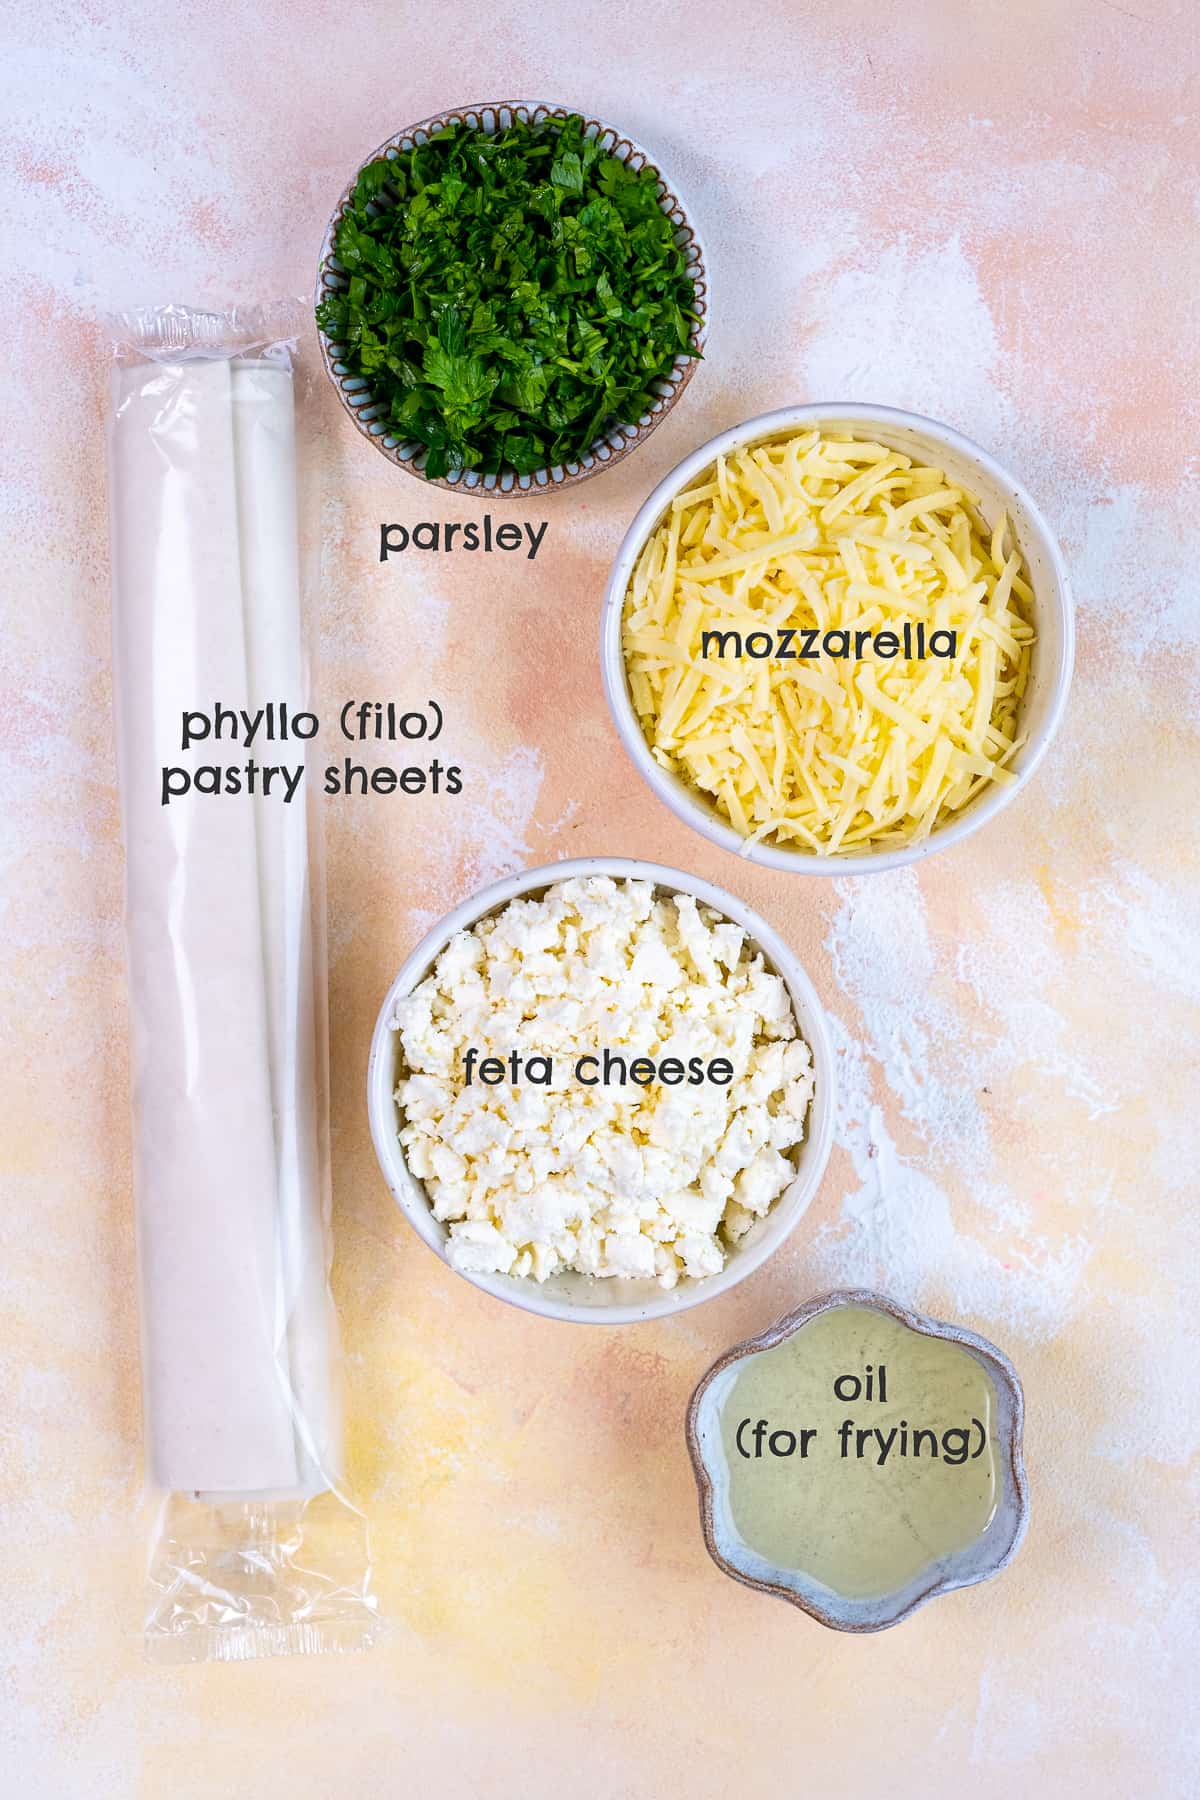 Phyllo dough, grated mozzarella, crumbled feta cheese, parsley and oil in separate bowls on a light background.